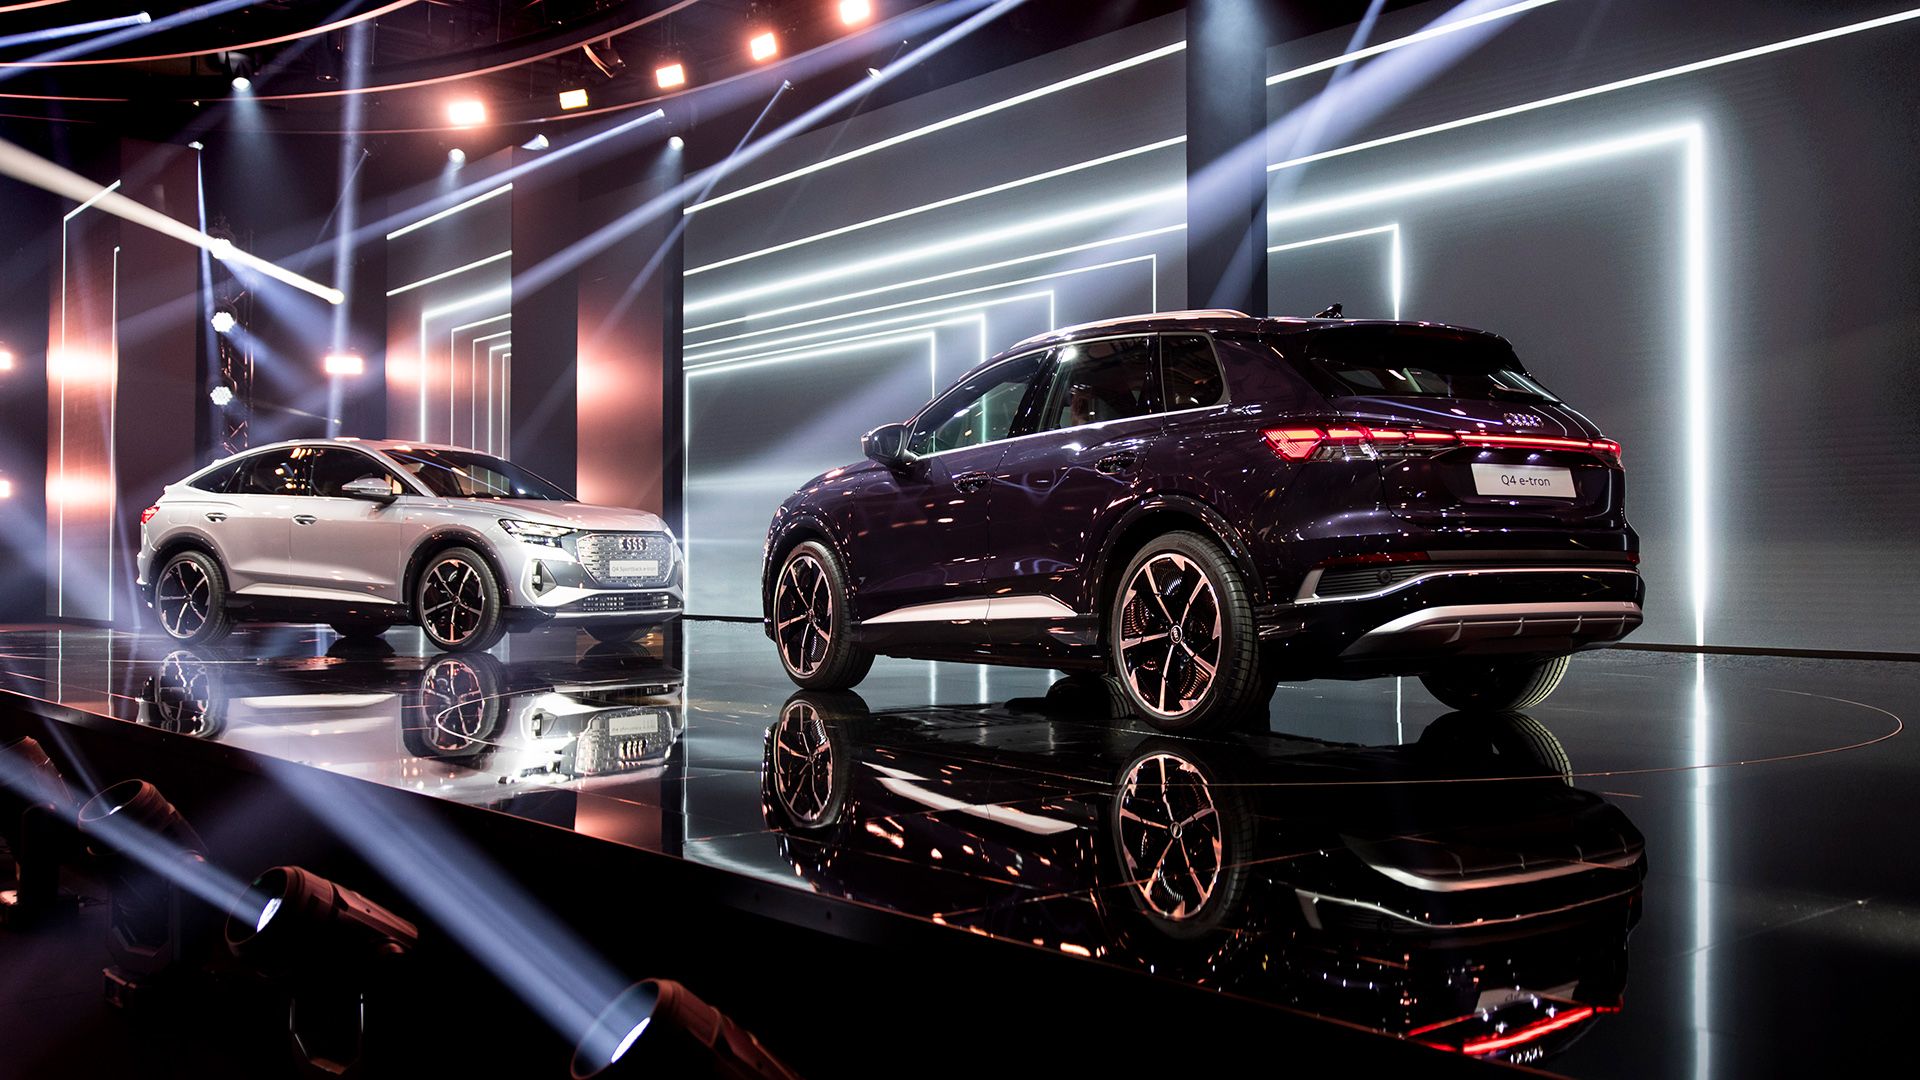 Two Audi Q4 e-tron models face one another on the stage.